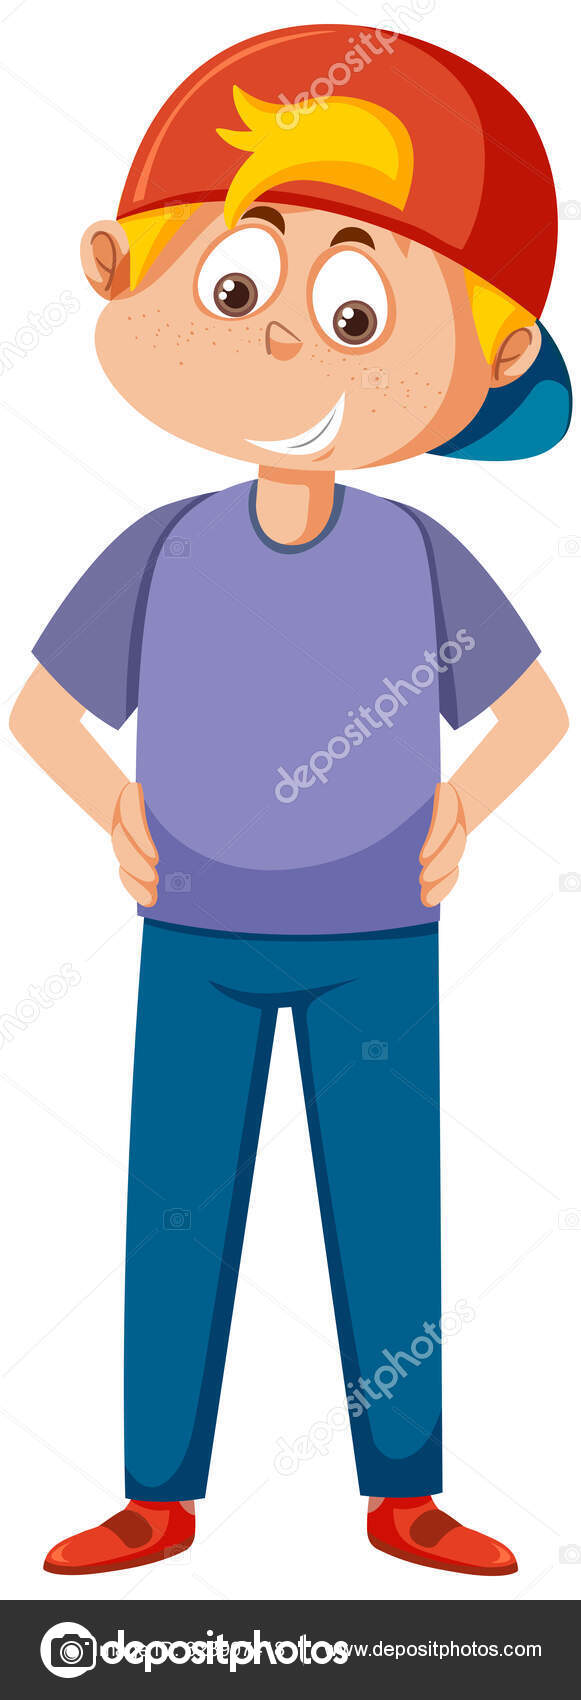 Boy Blonde Hair Cartoon Character Illustration Stock Vector Image by ©brgfx  #623907418